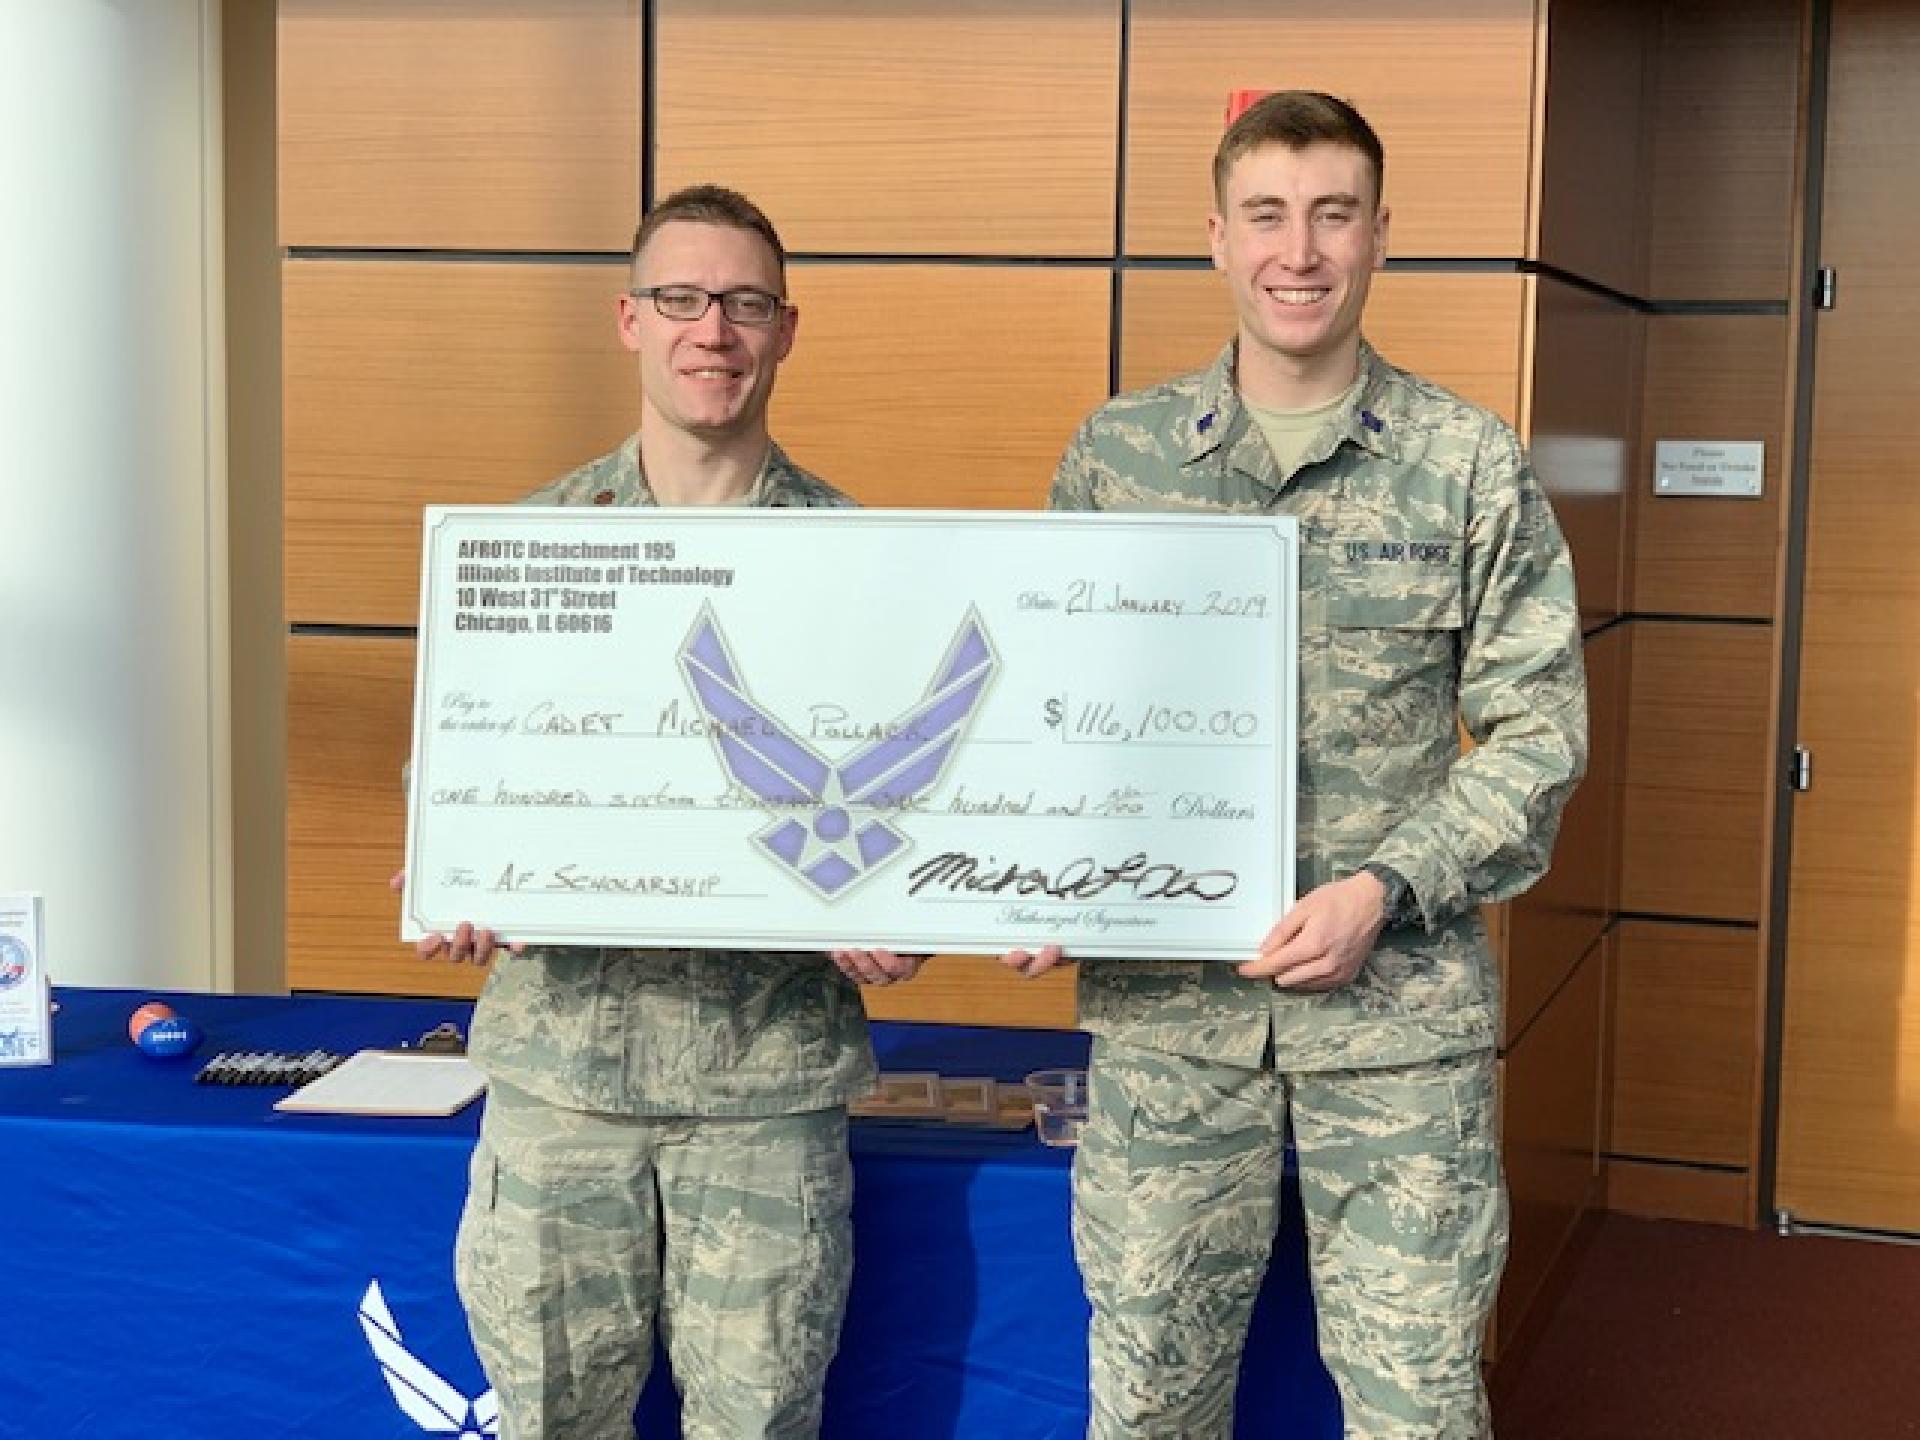 Major Jason Sterr presents a scholarship check to U.S. Air Force cadet and ROTC student Michael Pollack '21 of North Central College.